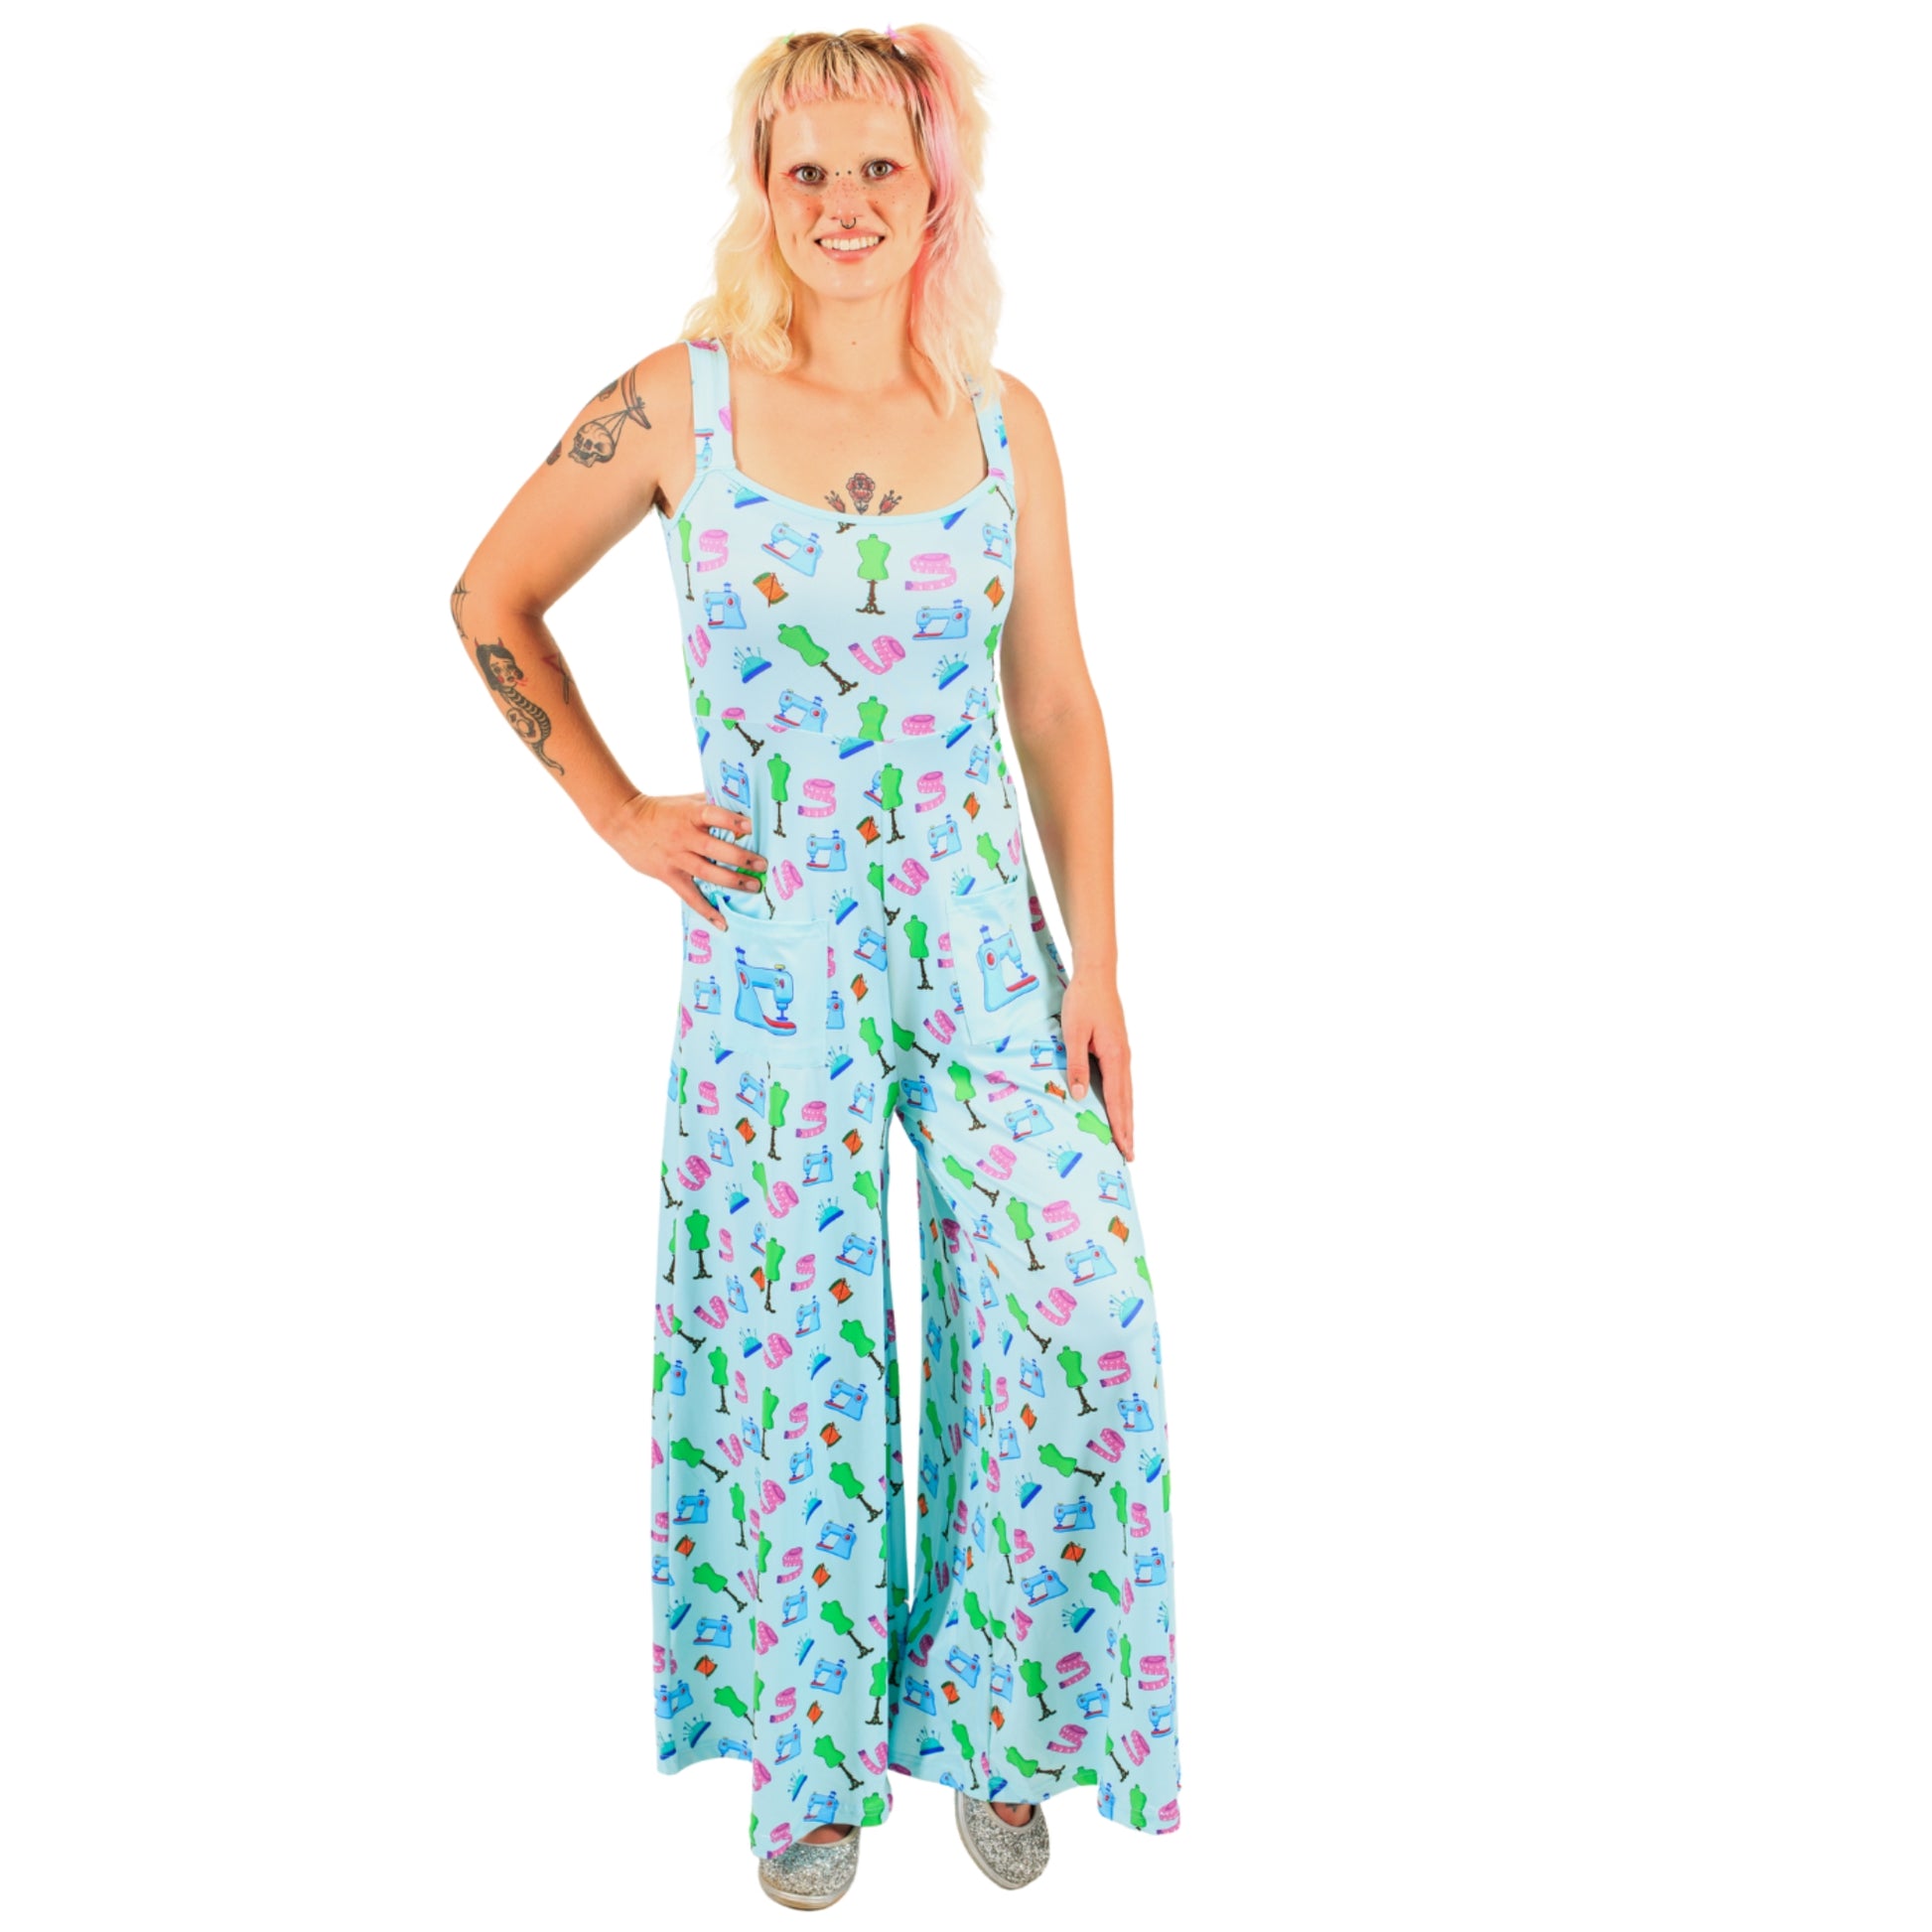 Haberdashery Jumpsuit by RainbowsAndFairies.com.au (Sewing - Dressmaking - Overalls - Wide Leg Pants - Kitsch - Rockabilly) - SKU: CL_JUMPS_HABER_ORG - Pic-03